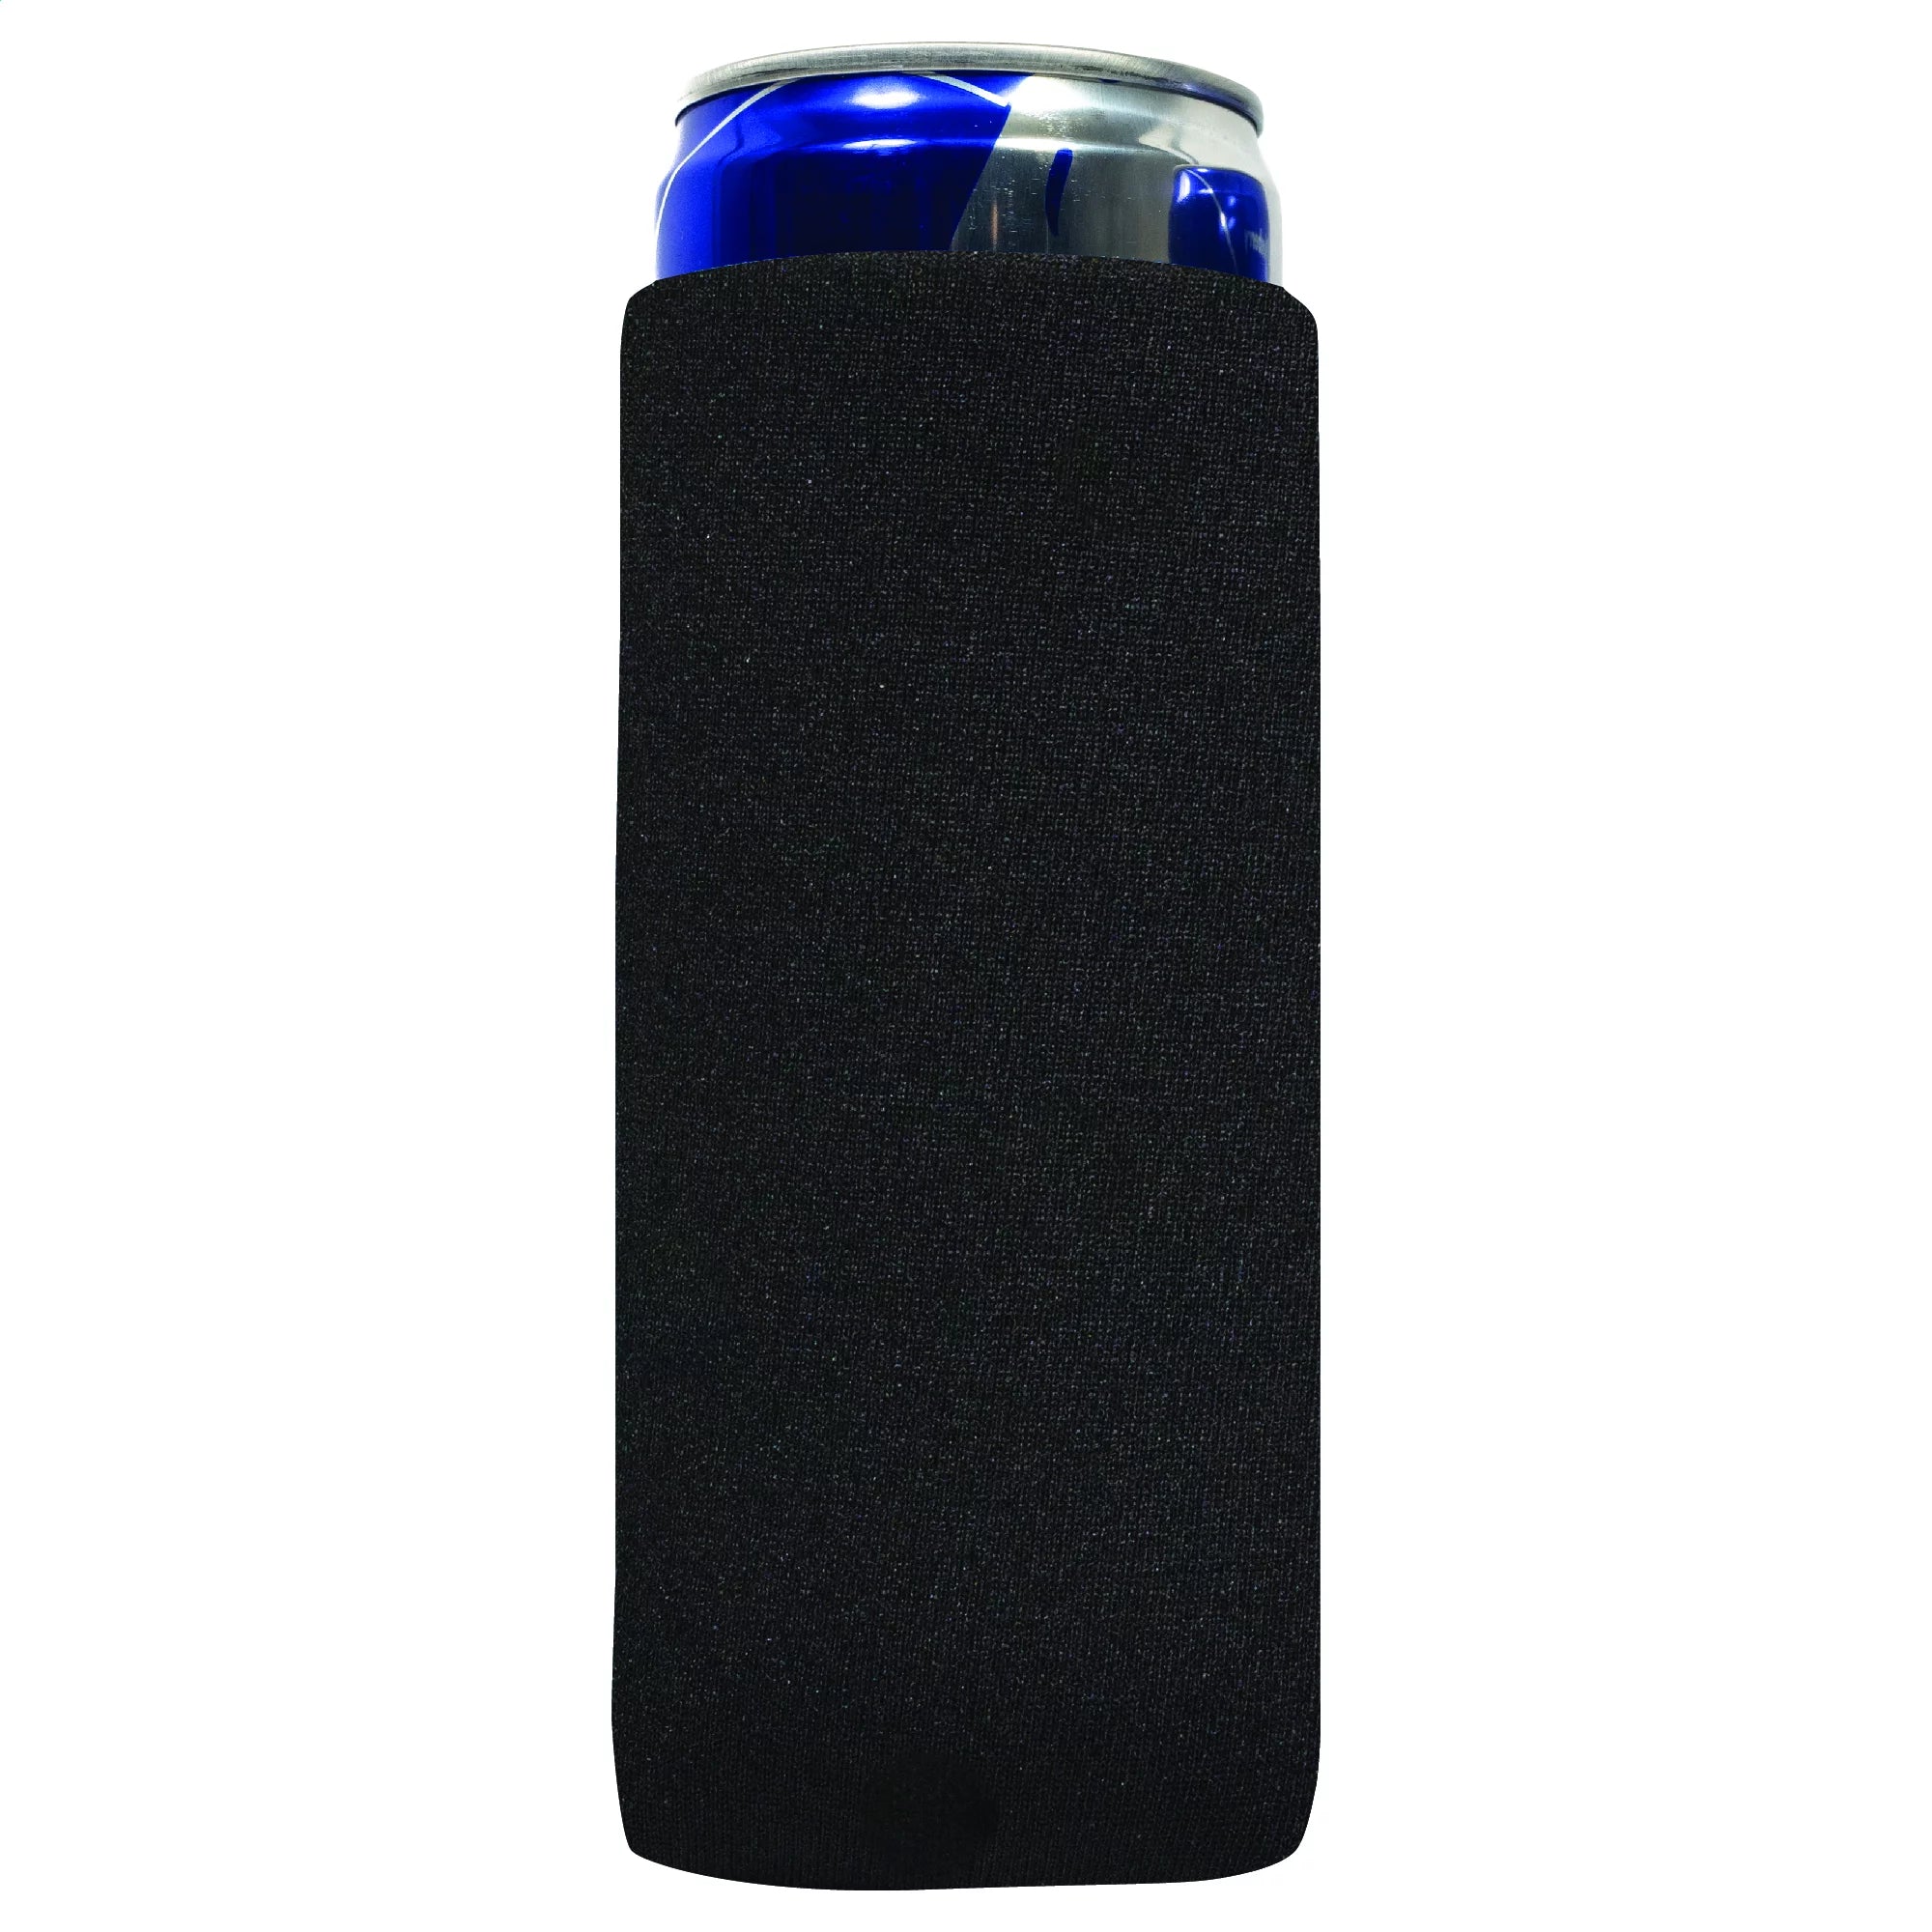 Crave Boutique - HUGE slim can koozie restock! These hold 12 ounce